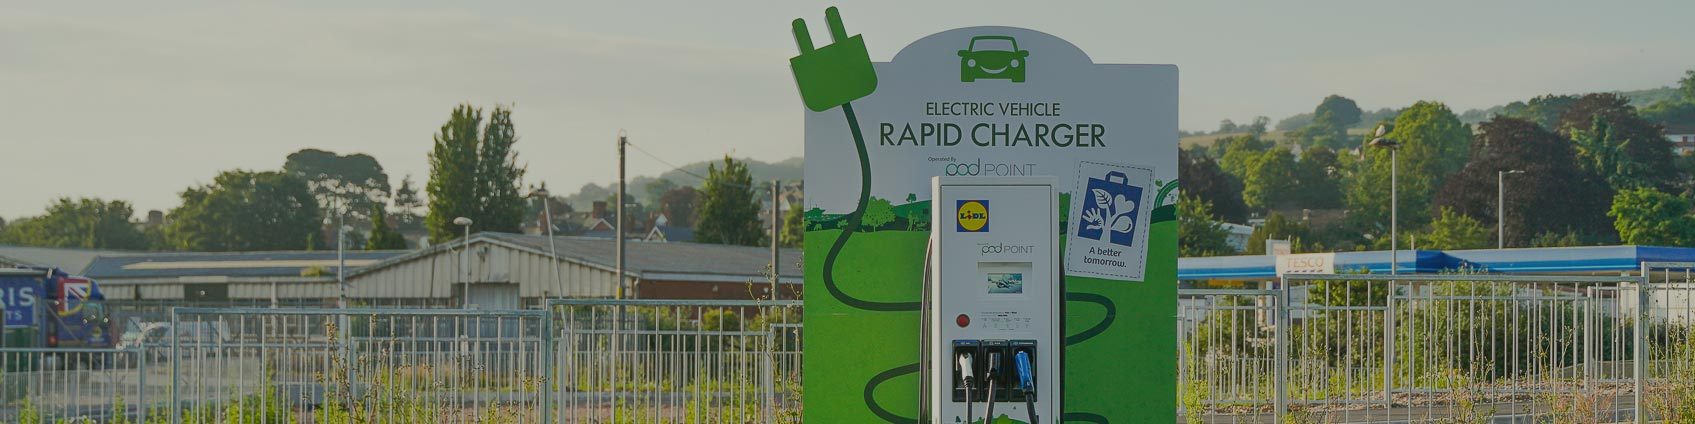 Update on the Lidl GB rapid charger rollout